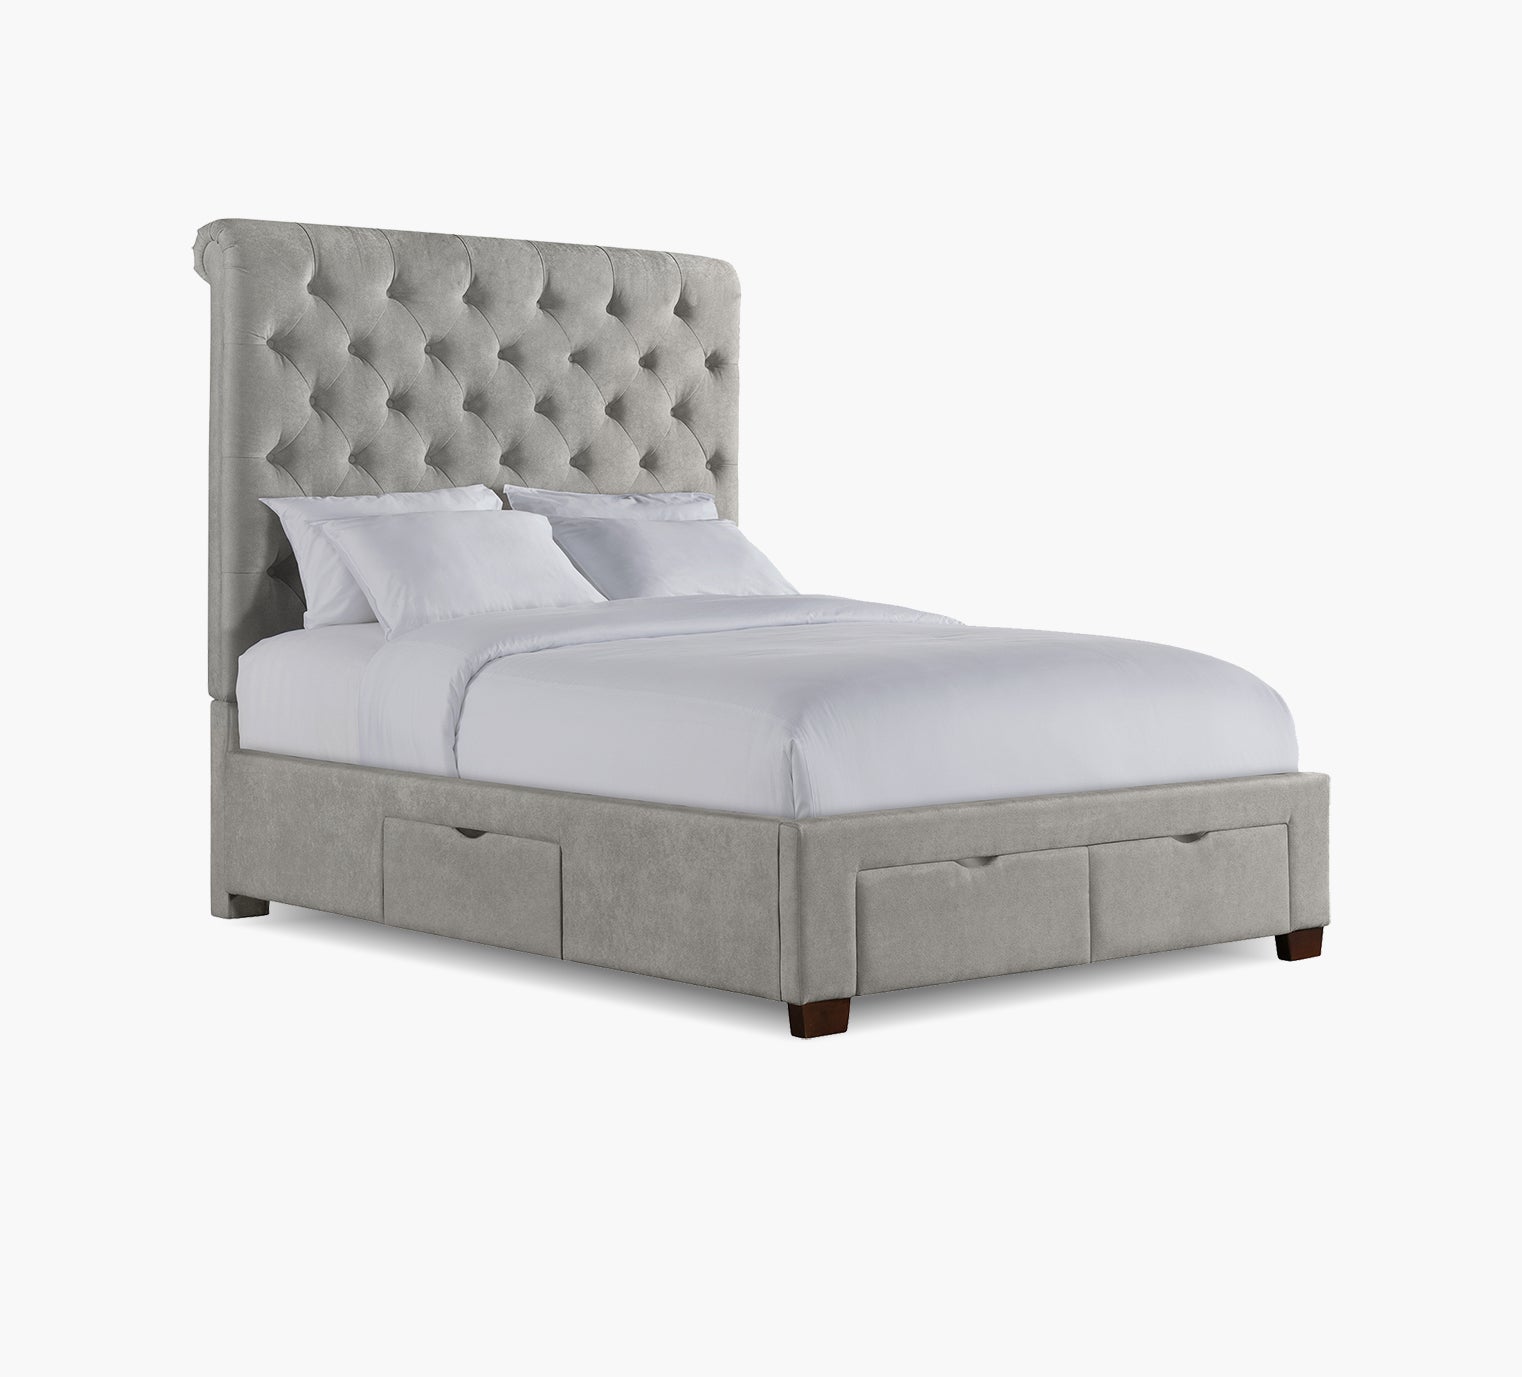 Walford Queen Upholstered Storage Bed   Kane's Furniture